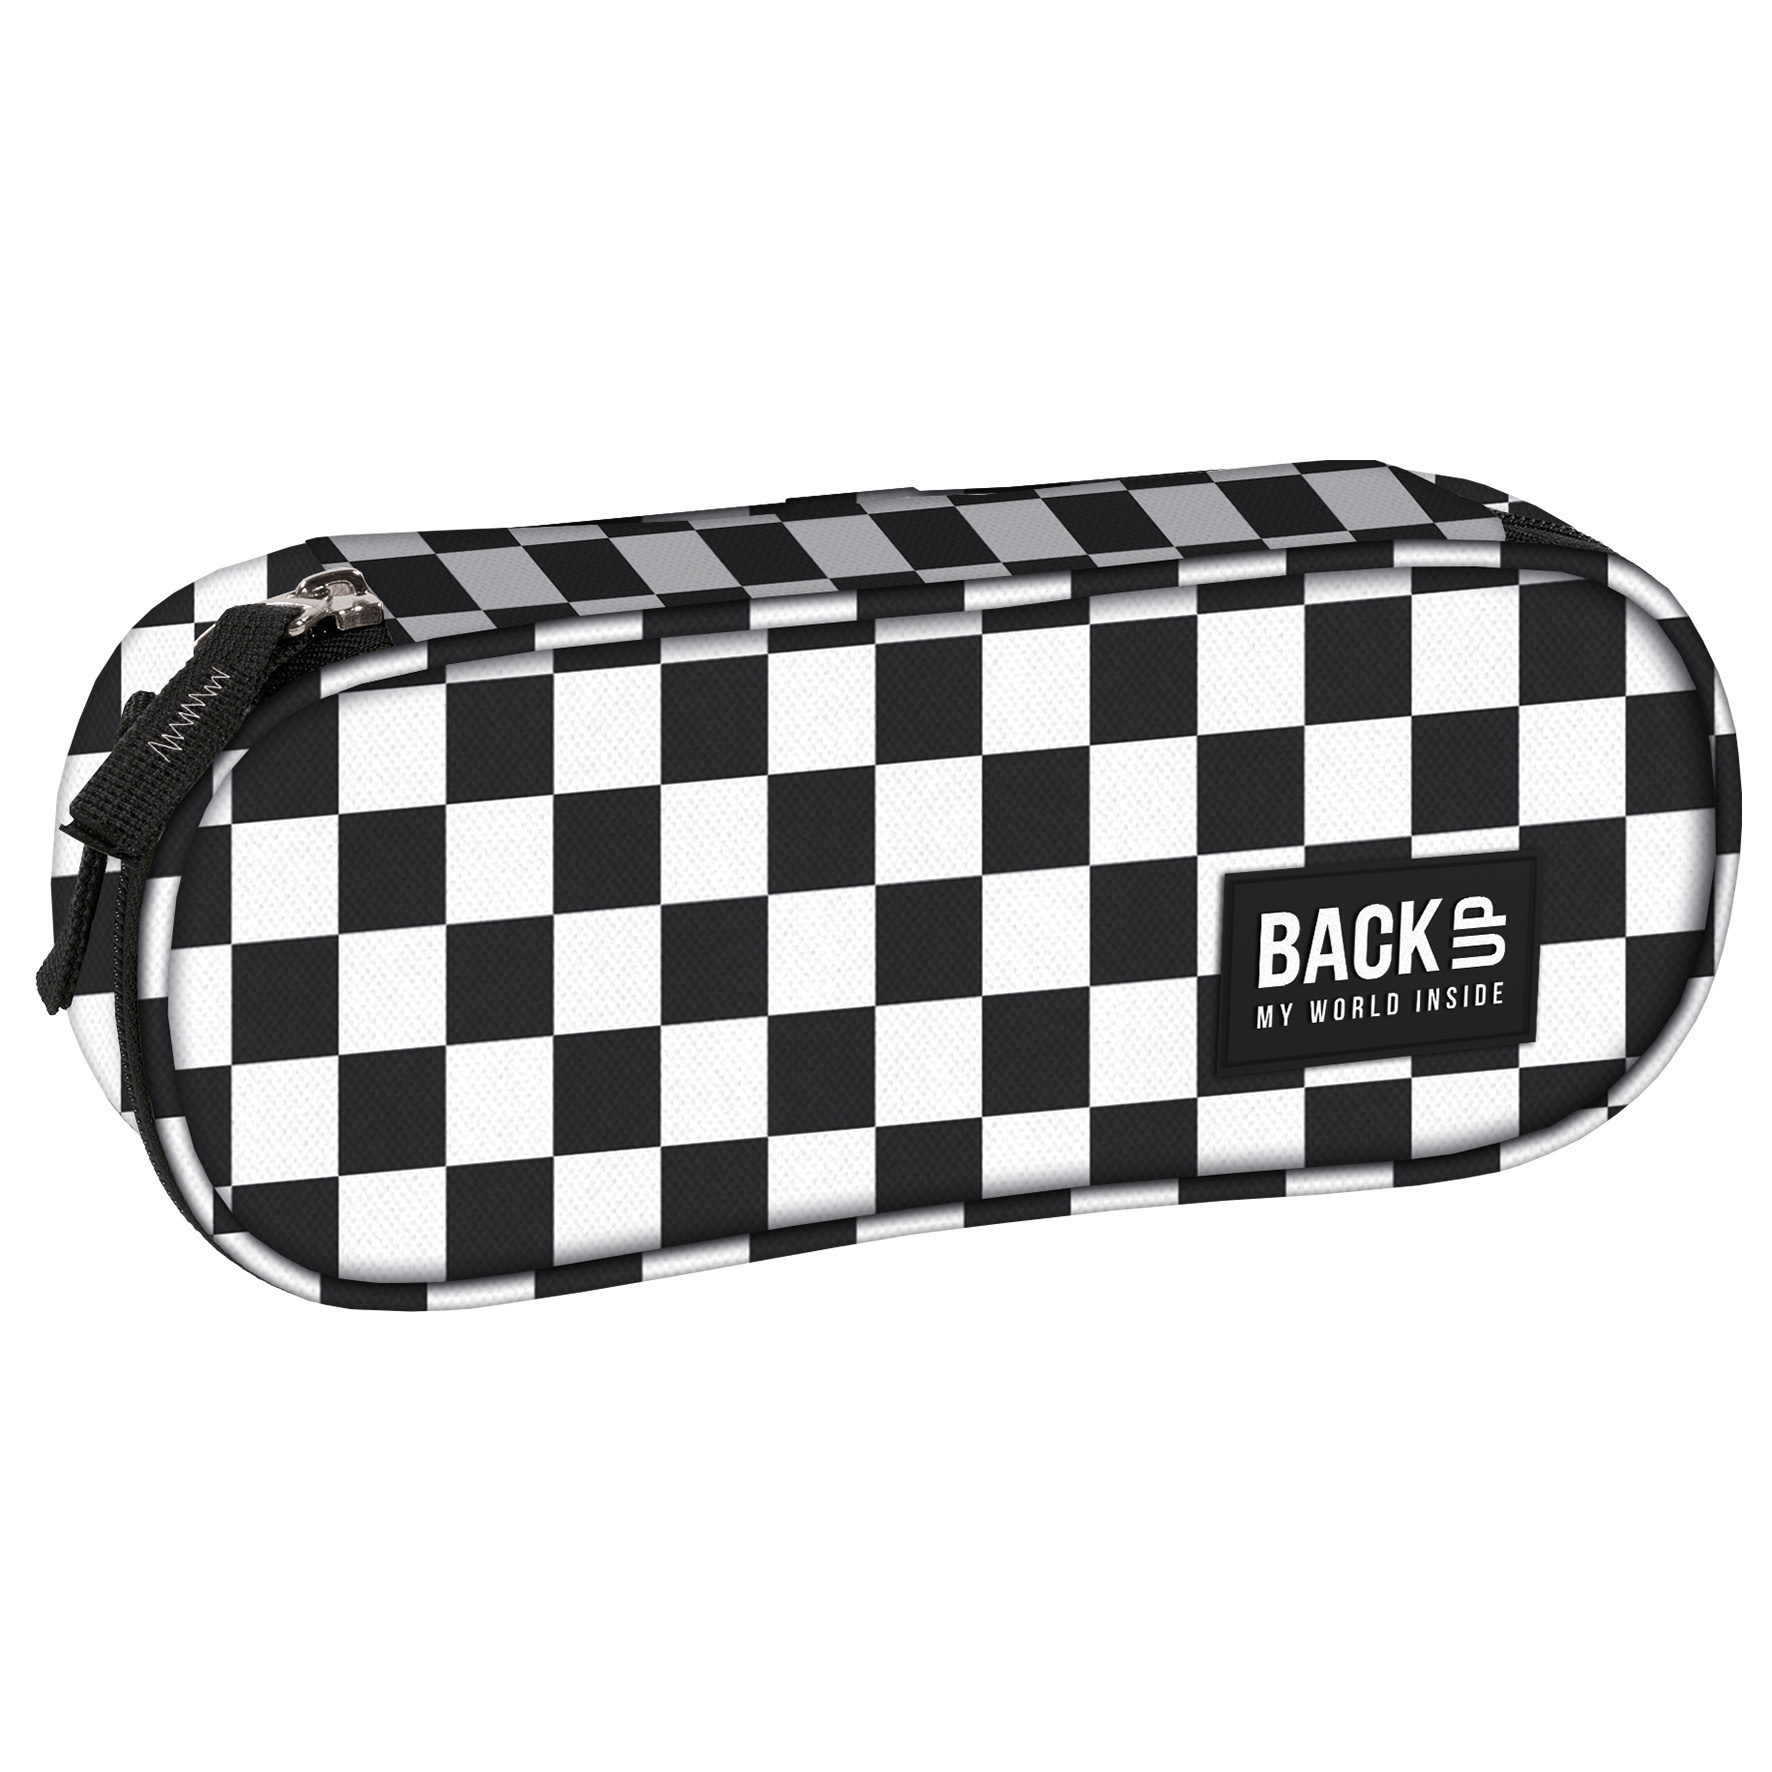 BackUP Pouch Black & Whtie - 23 x 9 x 5 cm - Polyester